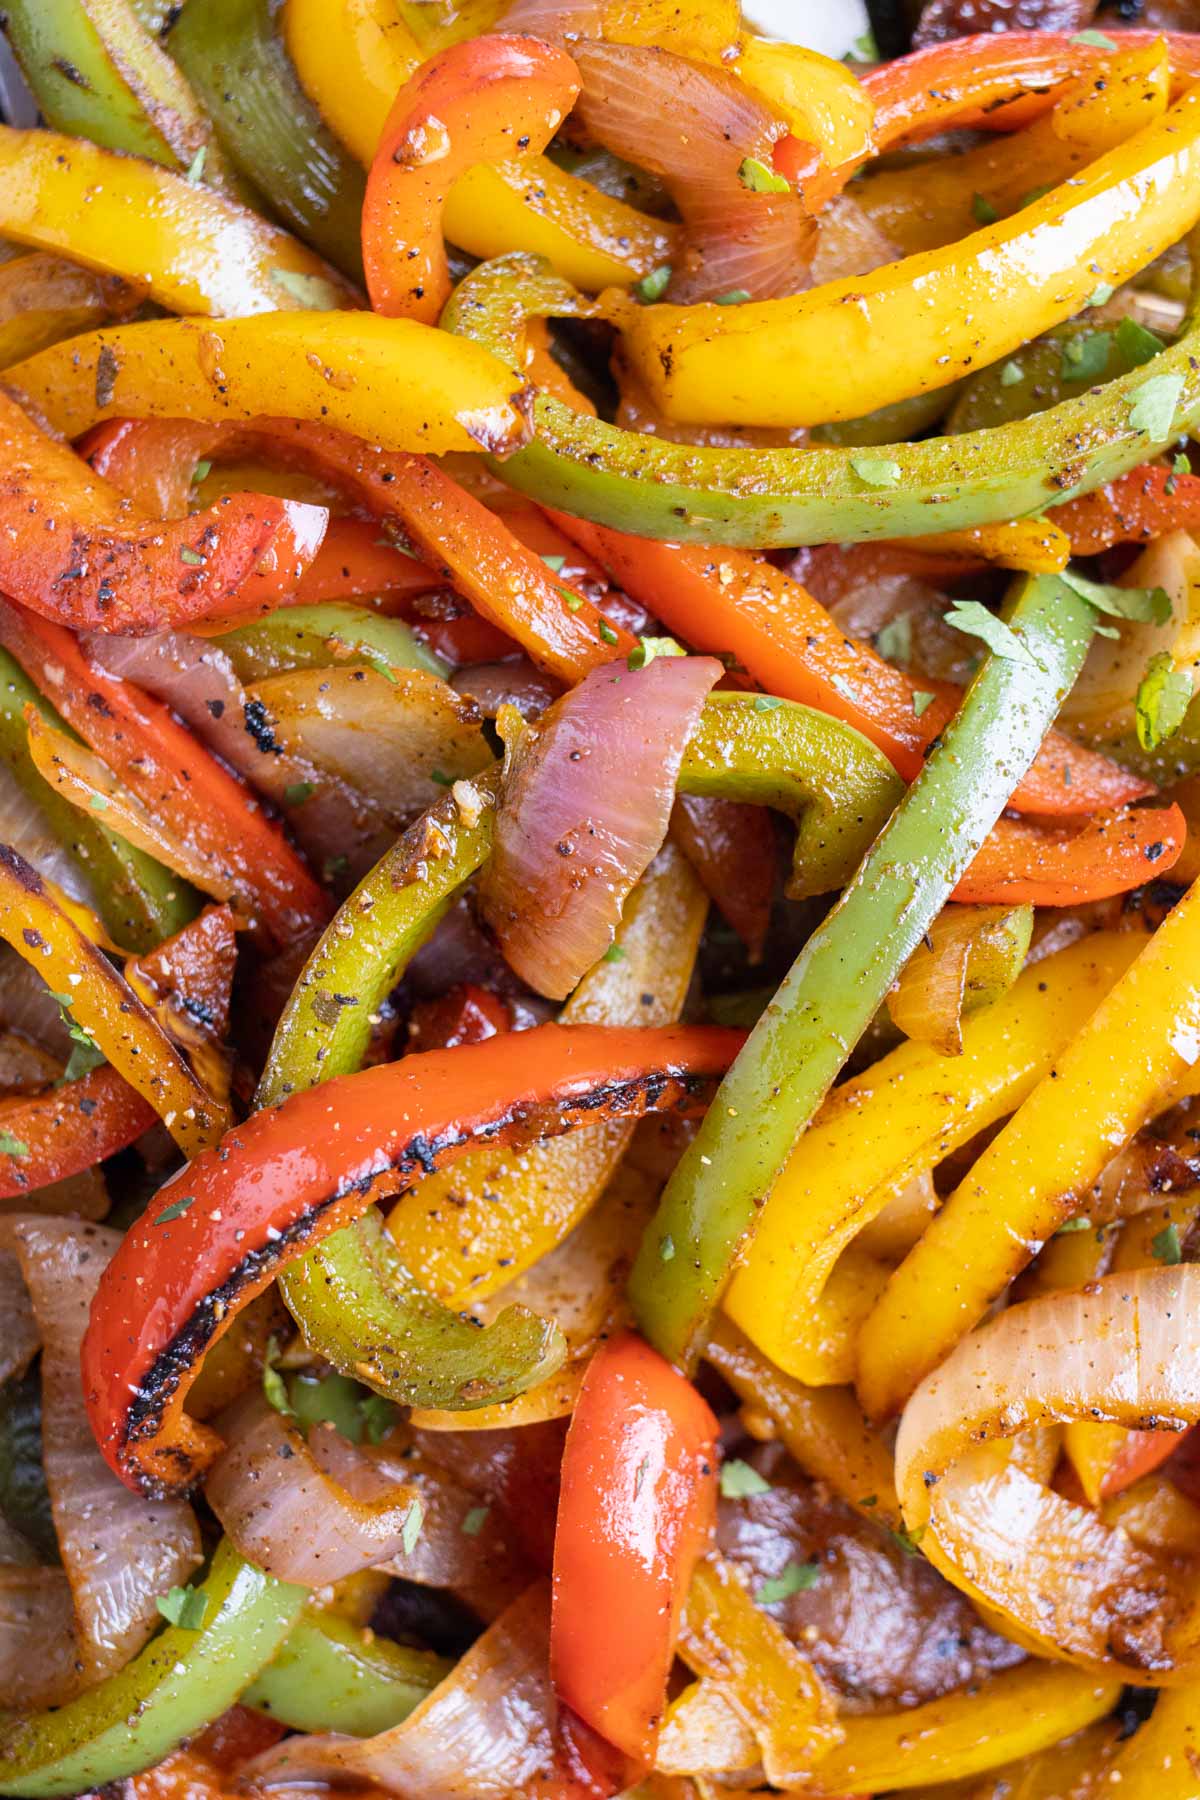 A close-up picture is used to show all the different types of flavorful vegetables.